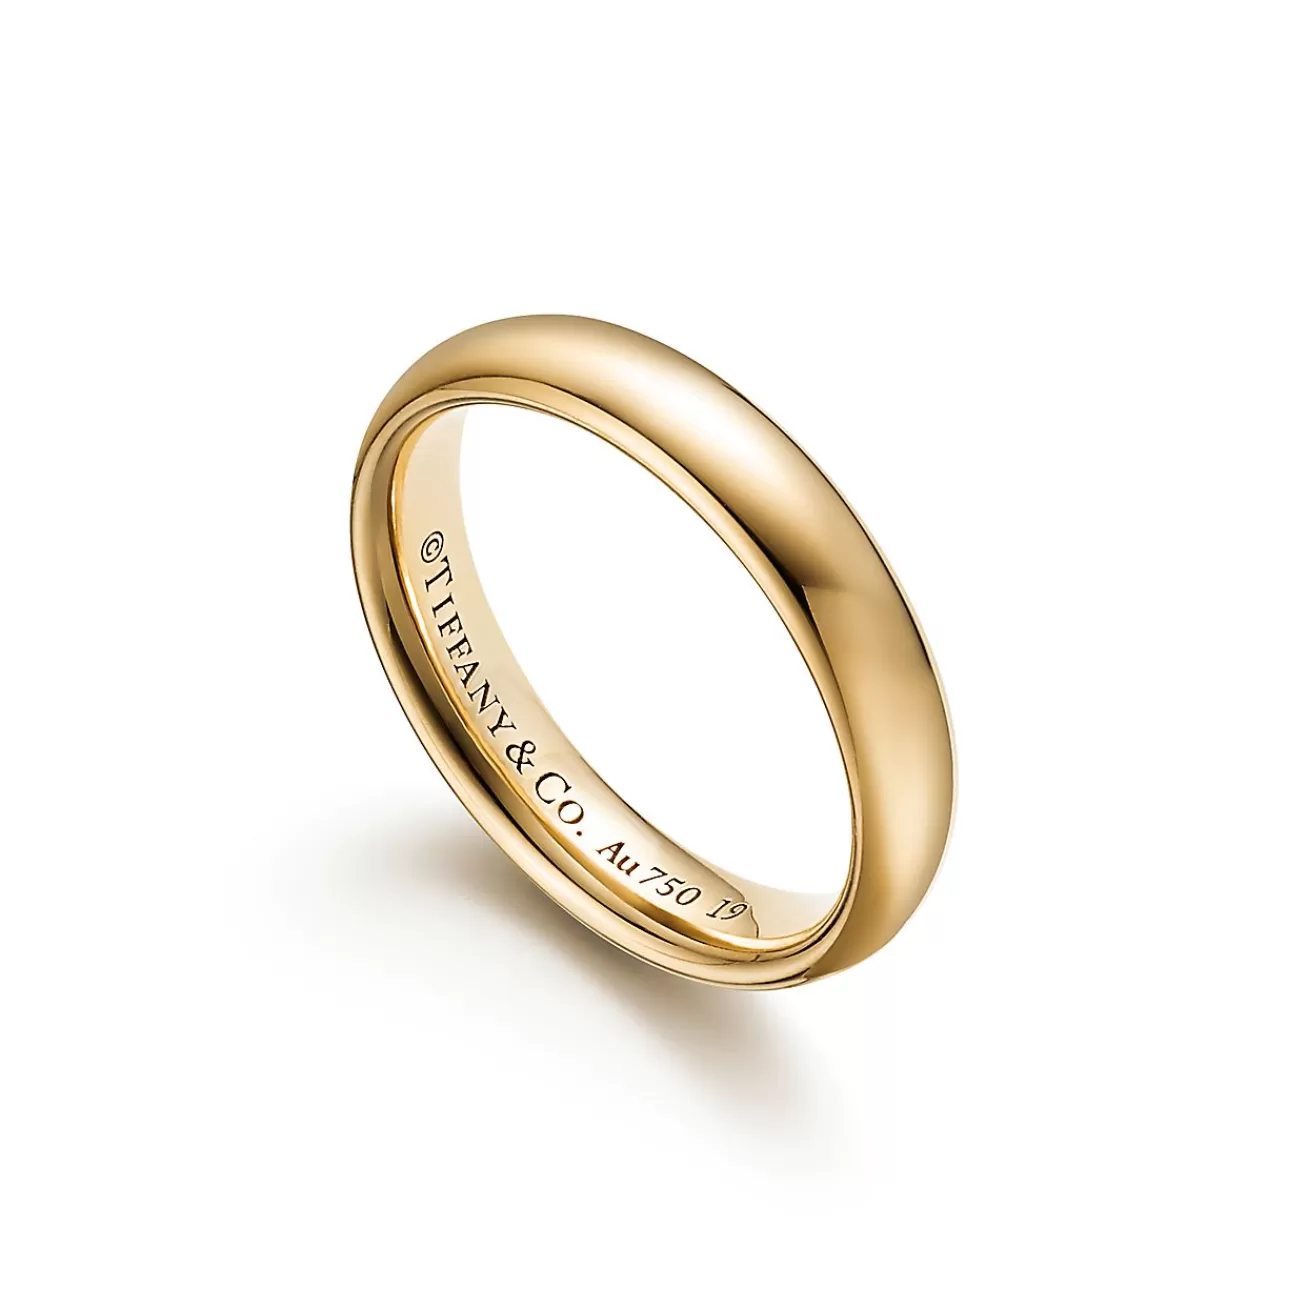 Tiffany & Co. Tiffany Forever Wedding Band Ring in Yellow Gold, 4 mm Wide | ^Women Rings | Gold Jewelry